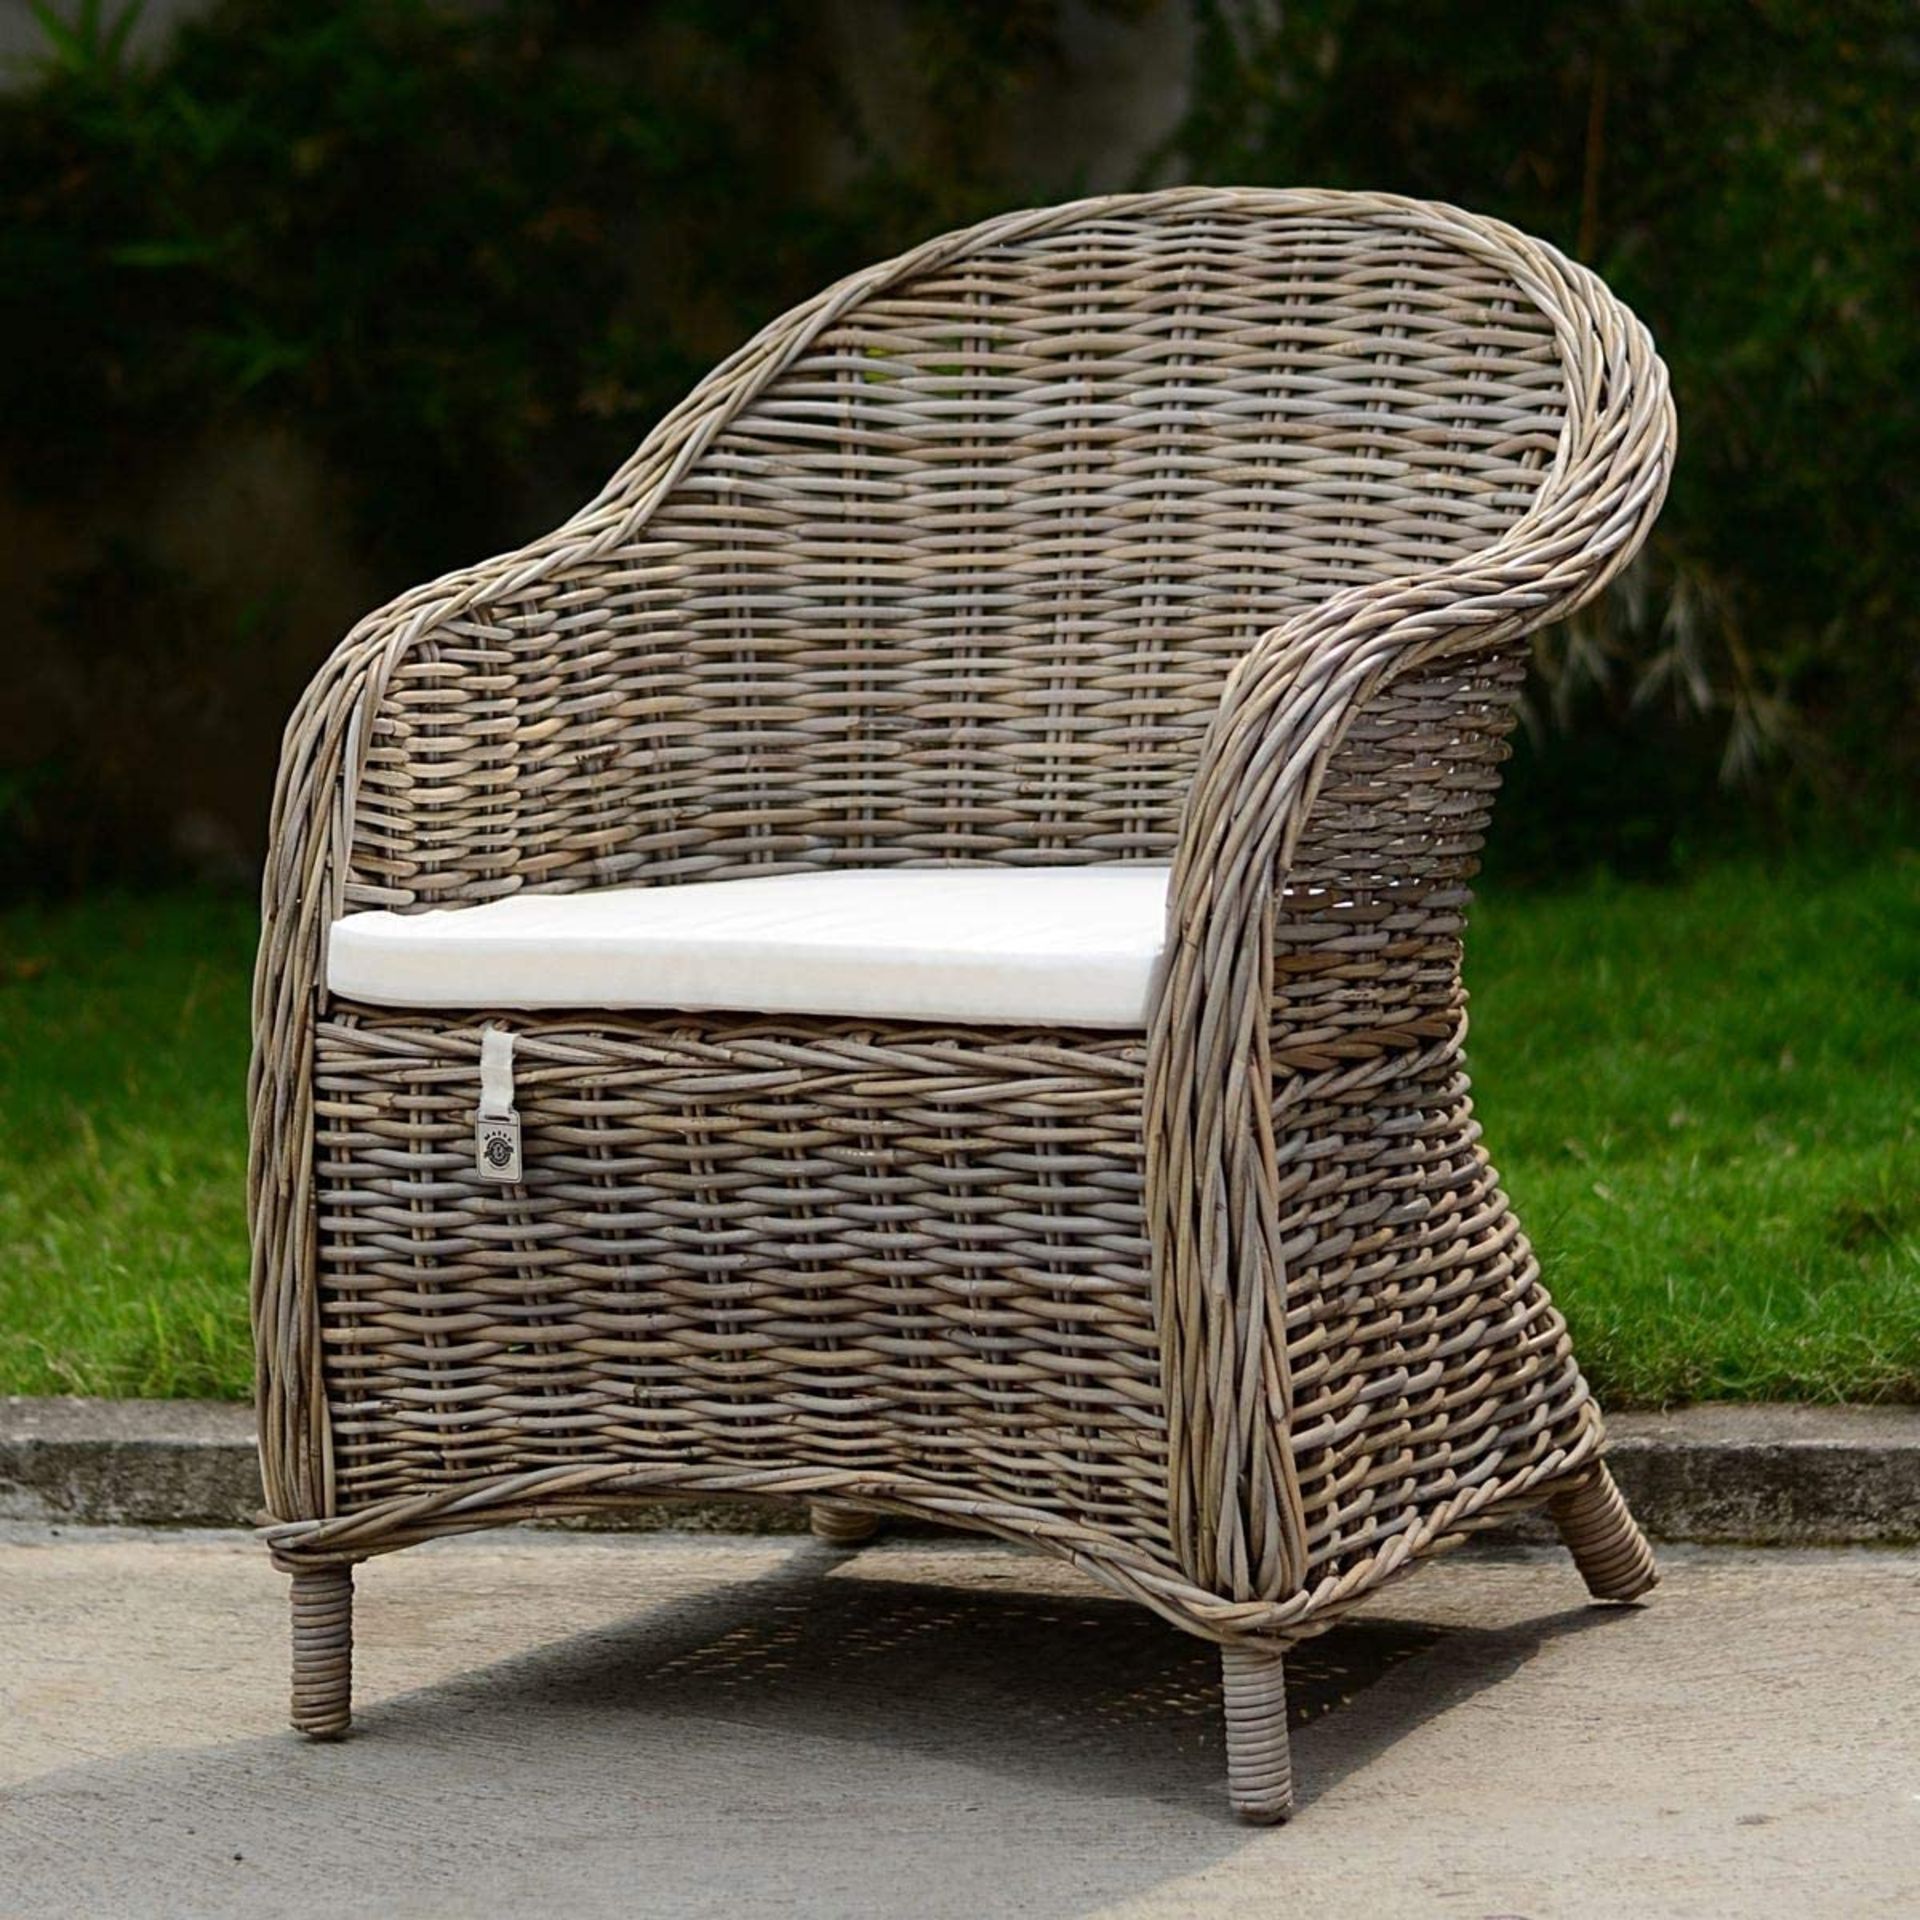 NEW & BOXED 2x Maine Furniture Co. Kubu Rattan Armchair with Cushion. (SR5). (SKU: M500156). STRONG, - Image 5 of 6